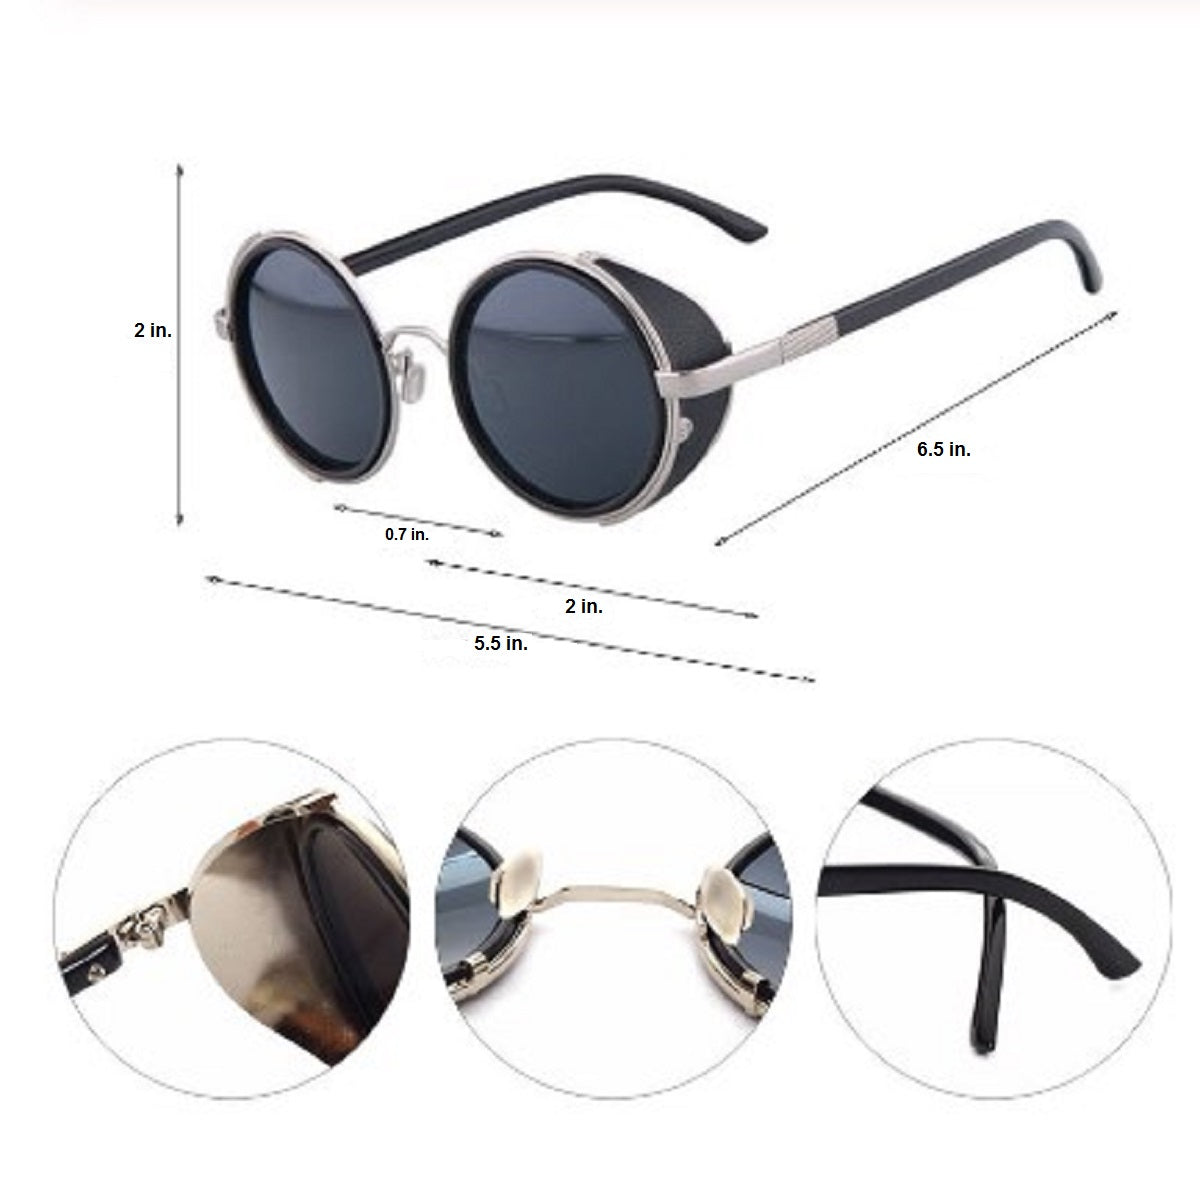 Motorcycle Vintage Round Sunglasses w/ UV 400 Protection, Polycarbonate ...